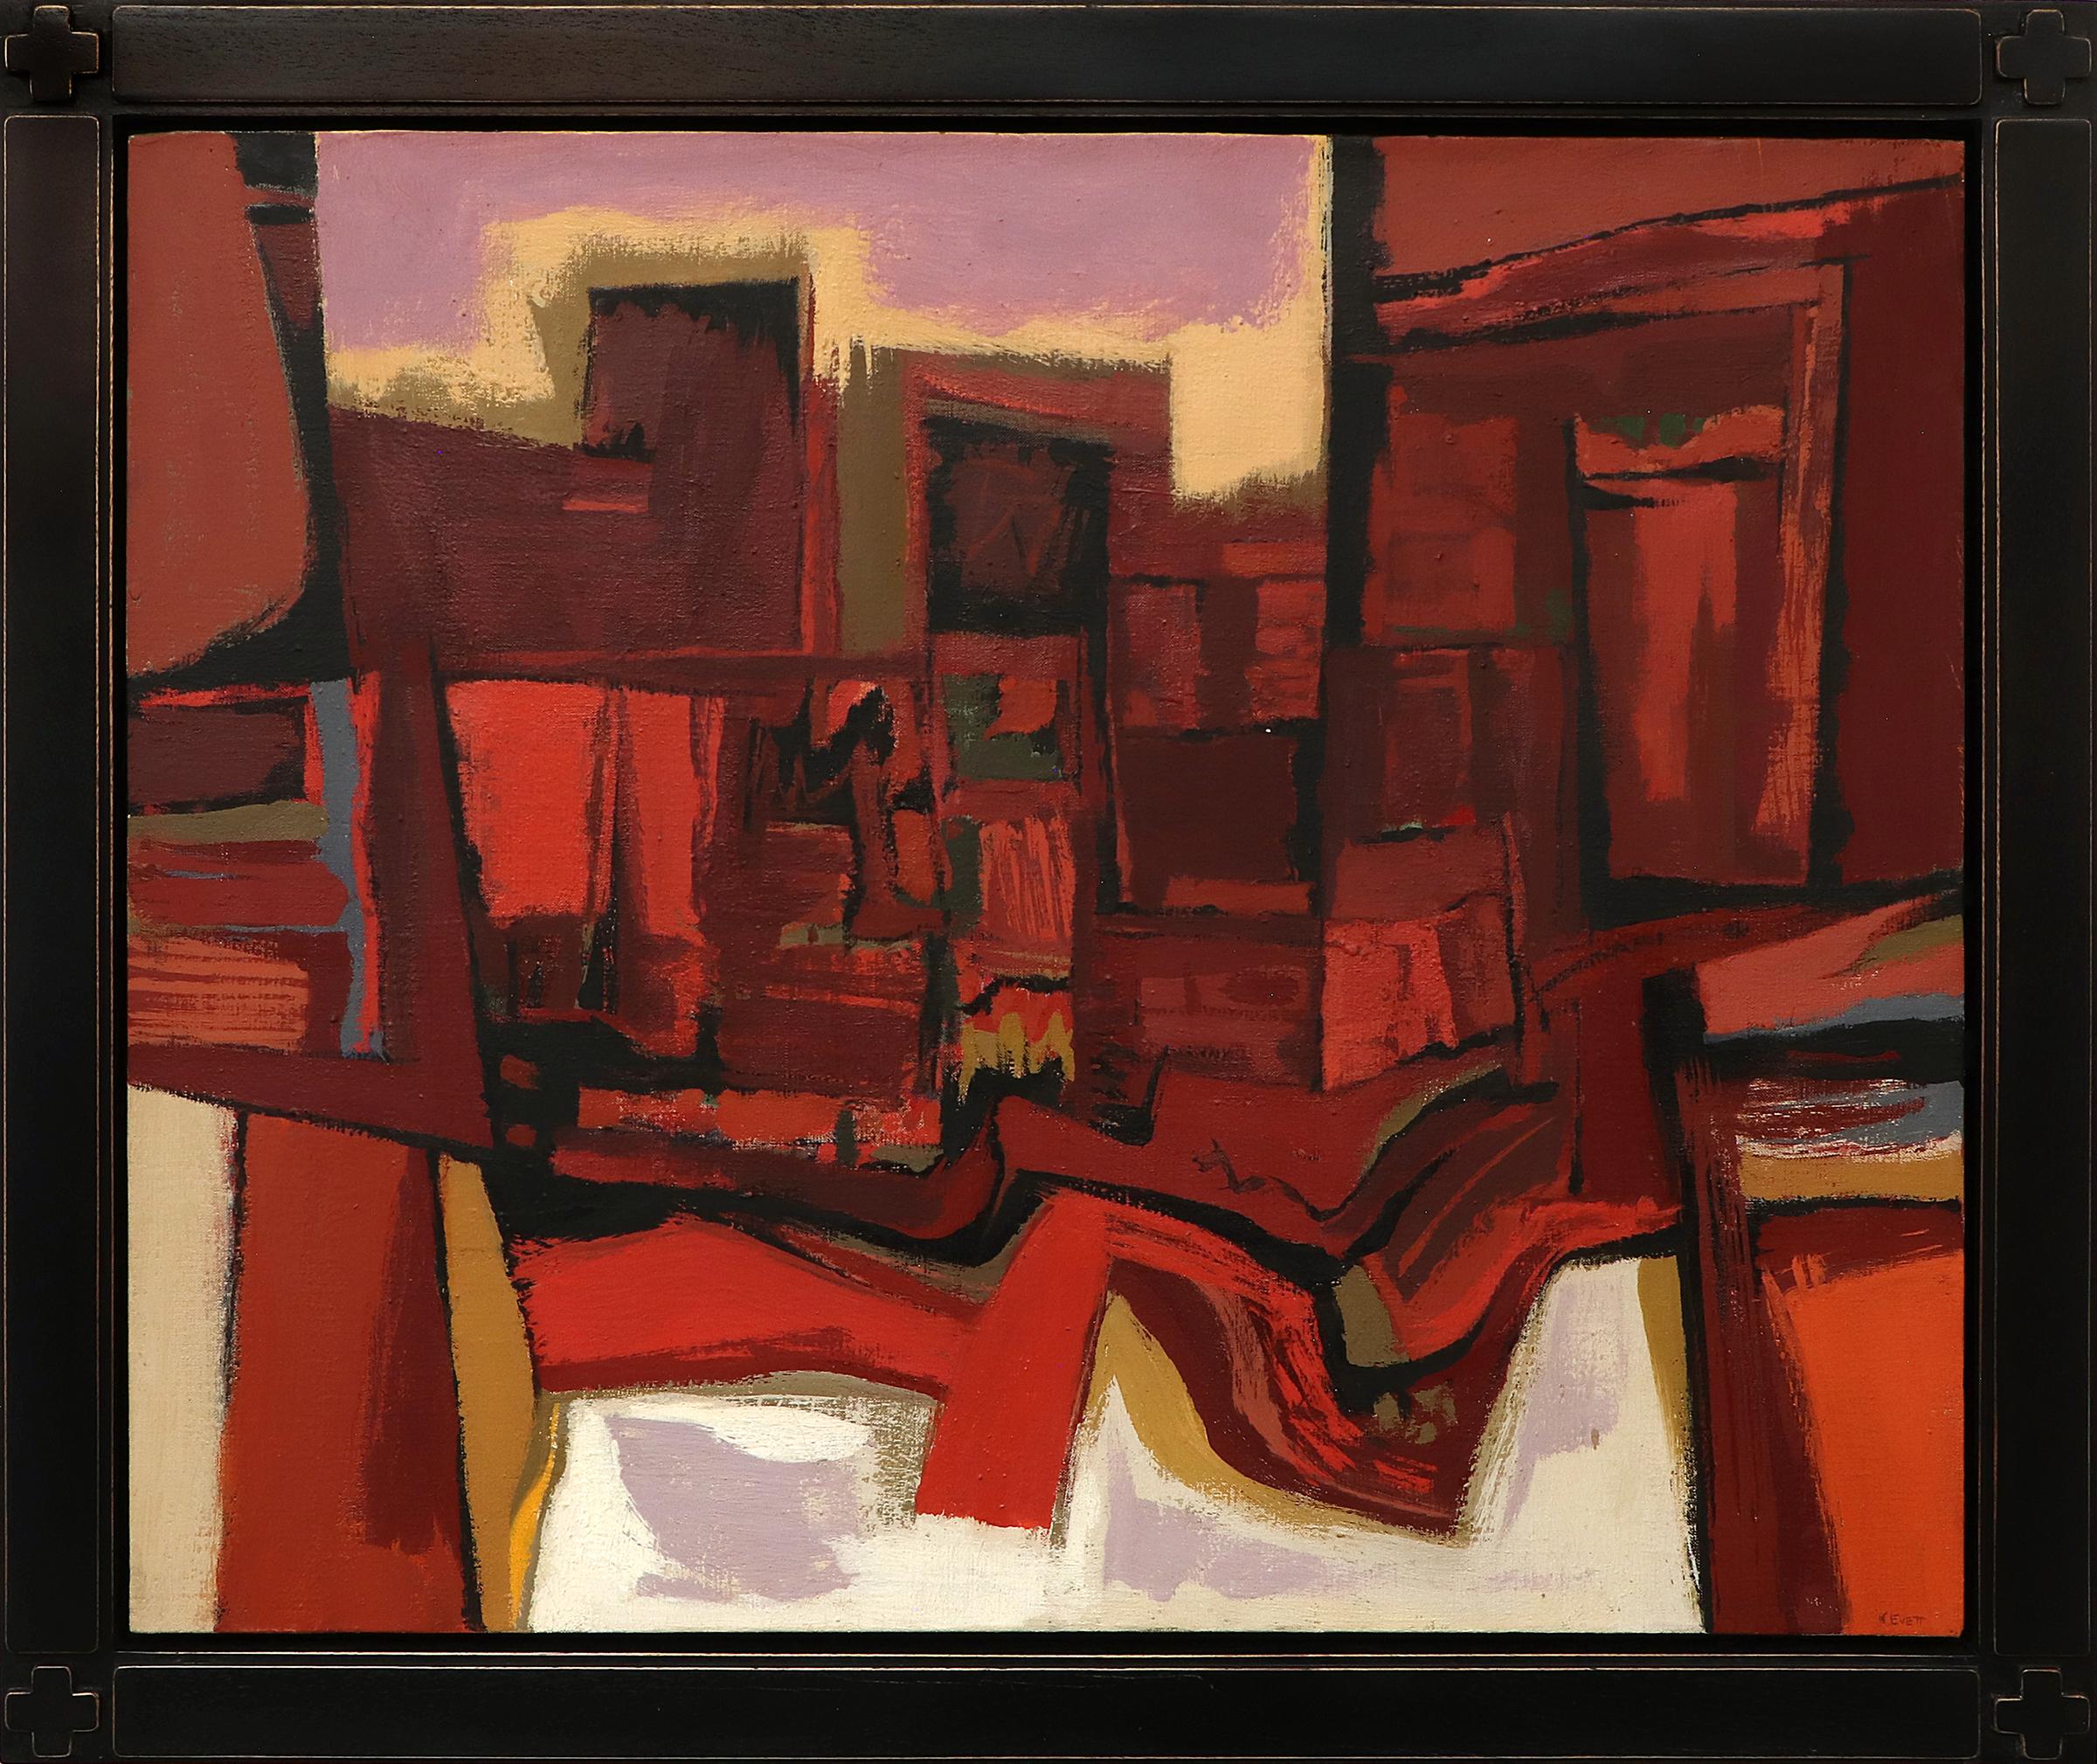 Kenneth Warnock Evett Abstract Painting - Arizona, Framed 1955 Abstract Oil Painting, Orange Pink, Lilac, Black